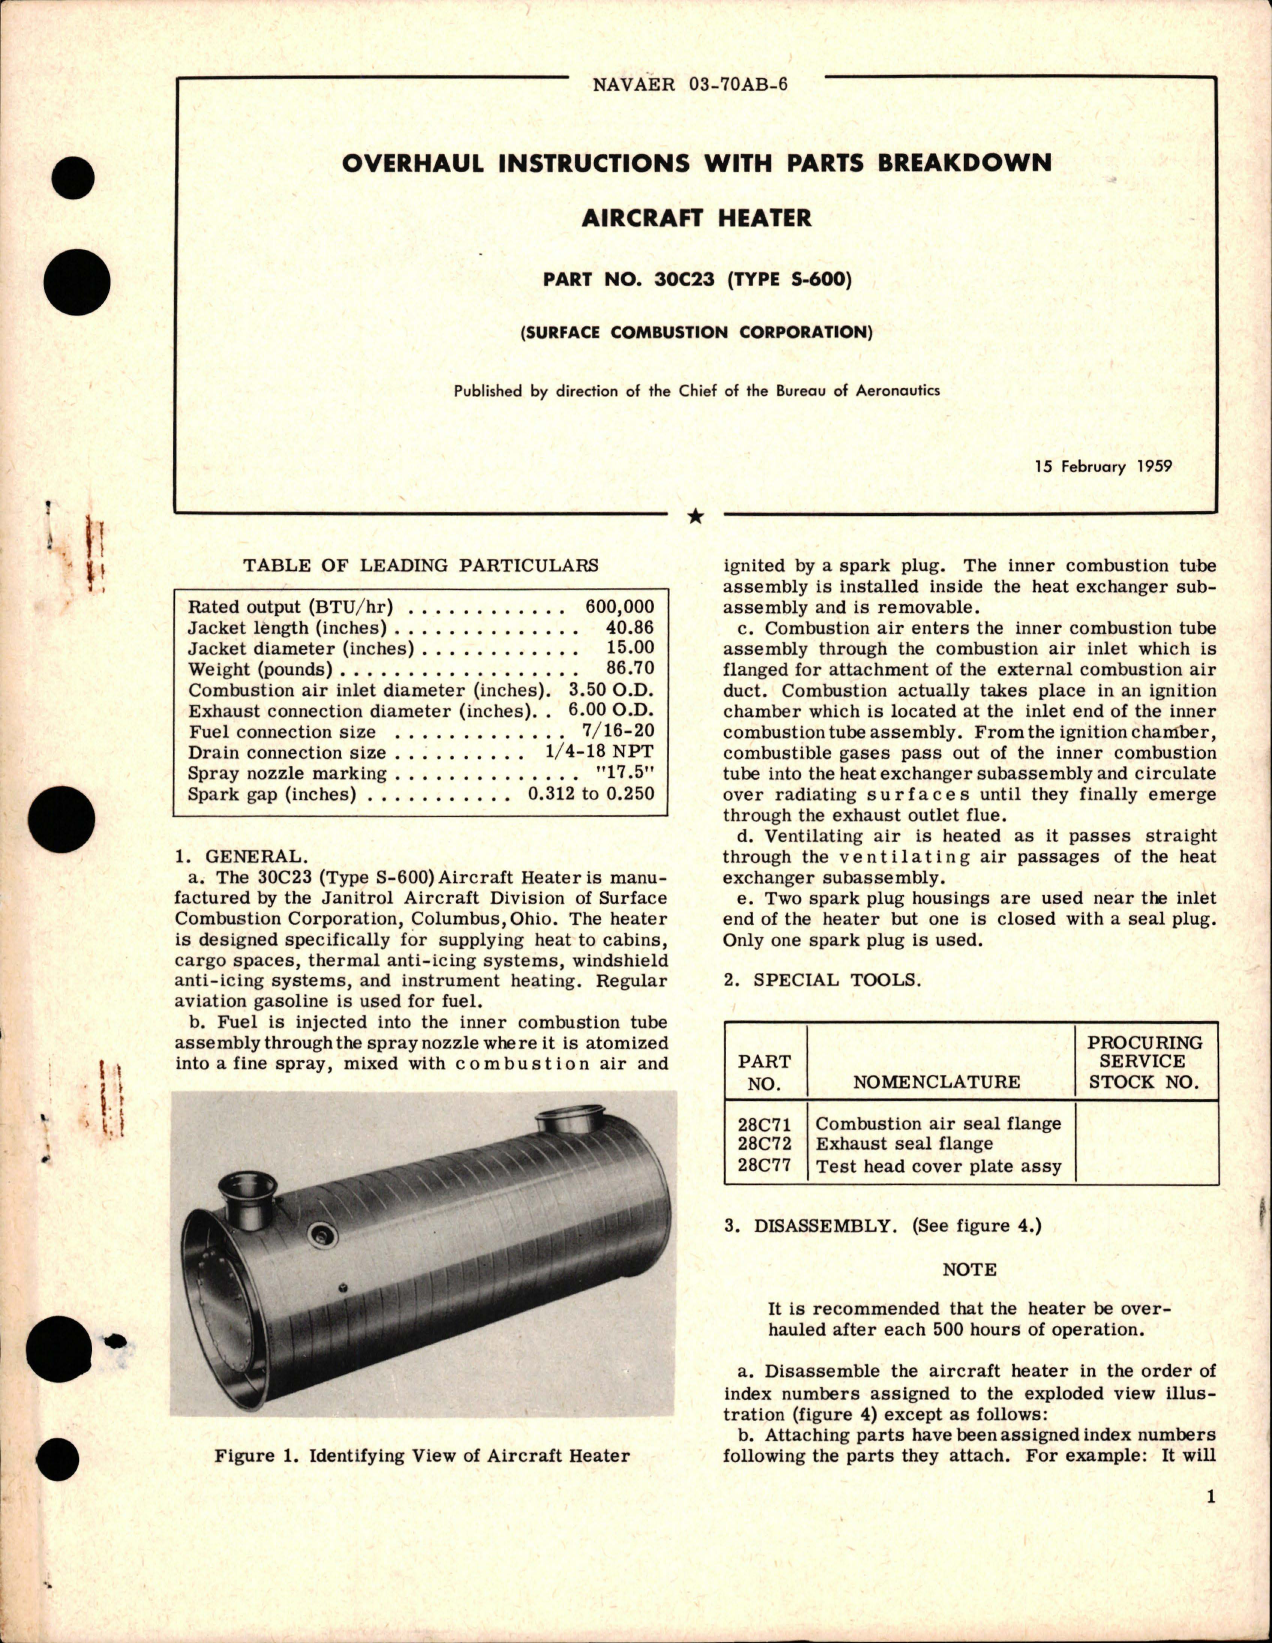 Sample page 1 from AirCorps Library document: Overhaul Instructions with Parts Breakdown for Aircraft Heater - Part 30C23 - Type S-600 